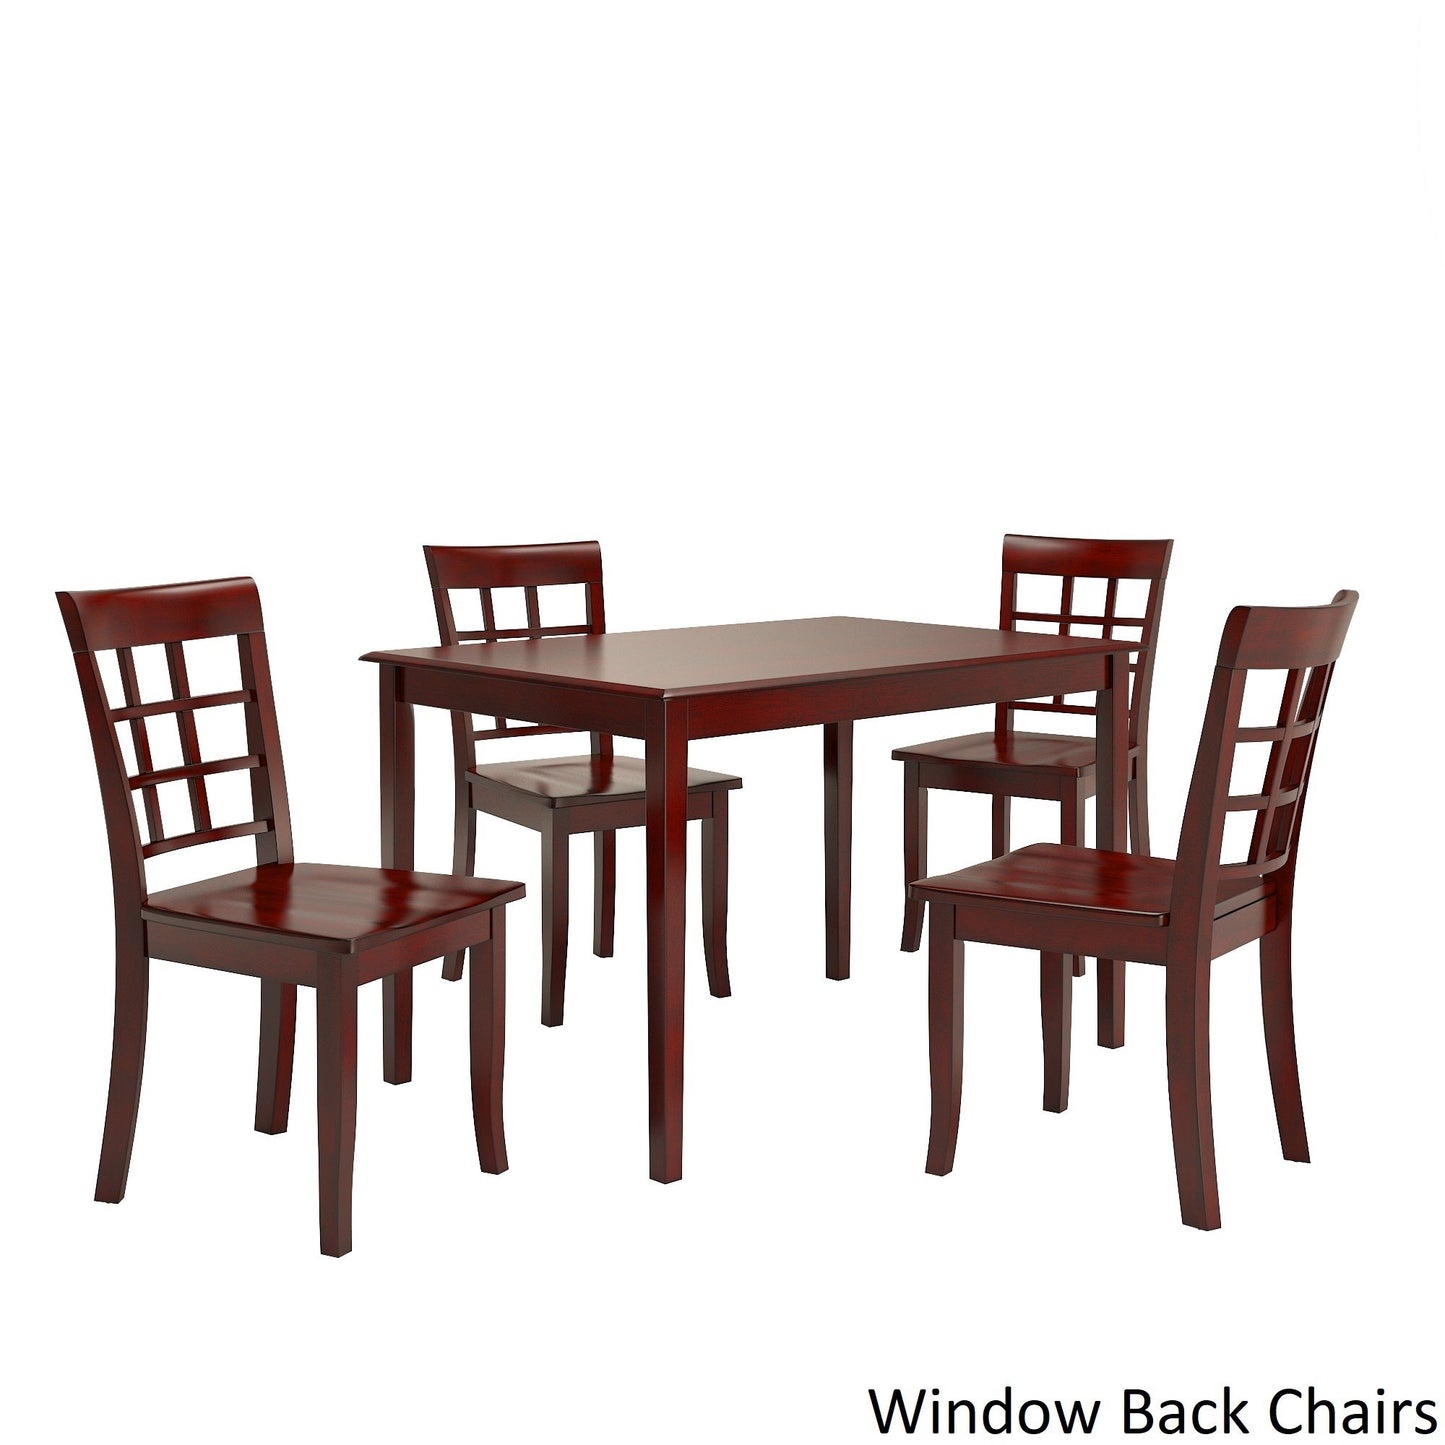 Oak Wood Finish 48-inch Rectangle Dining Set - Antique Berry Red Finish, Window Back Chairs